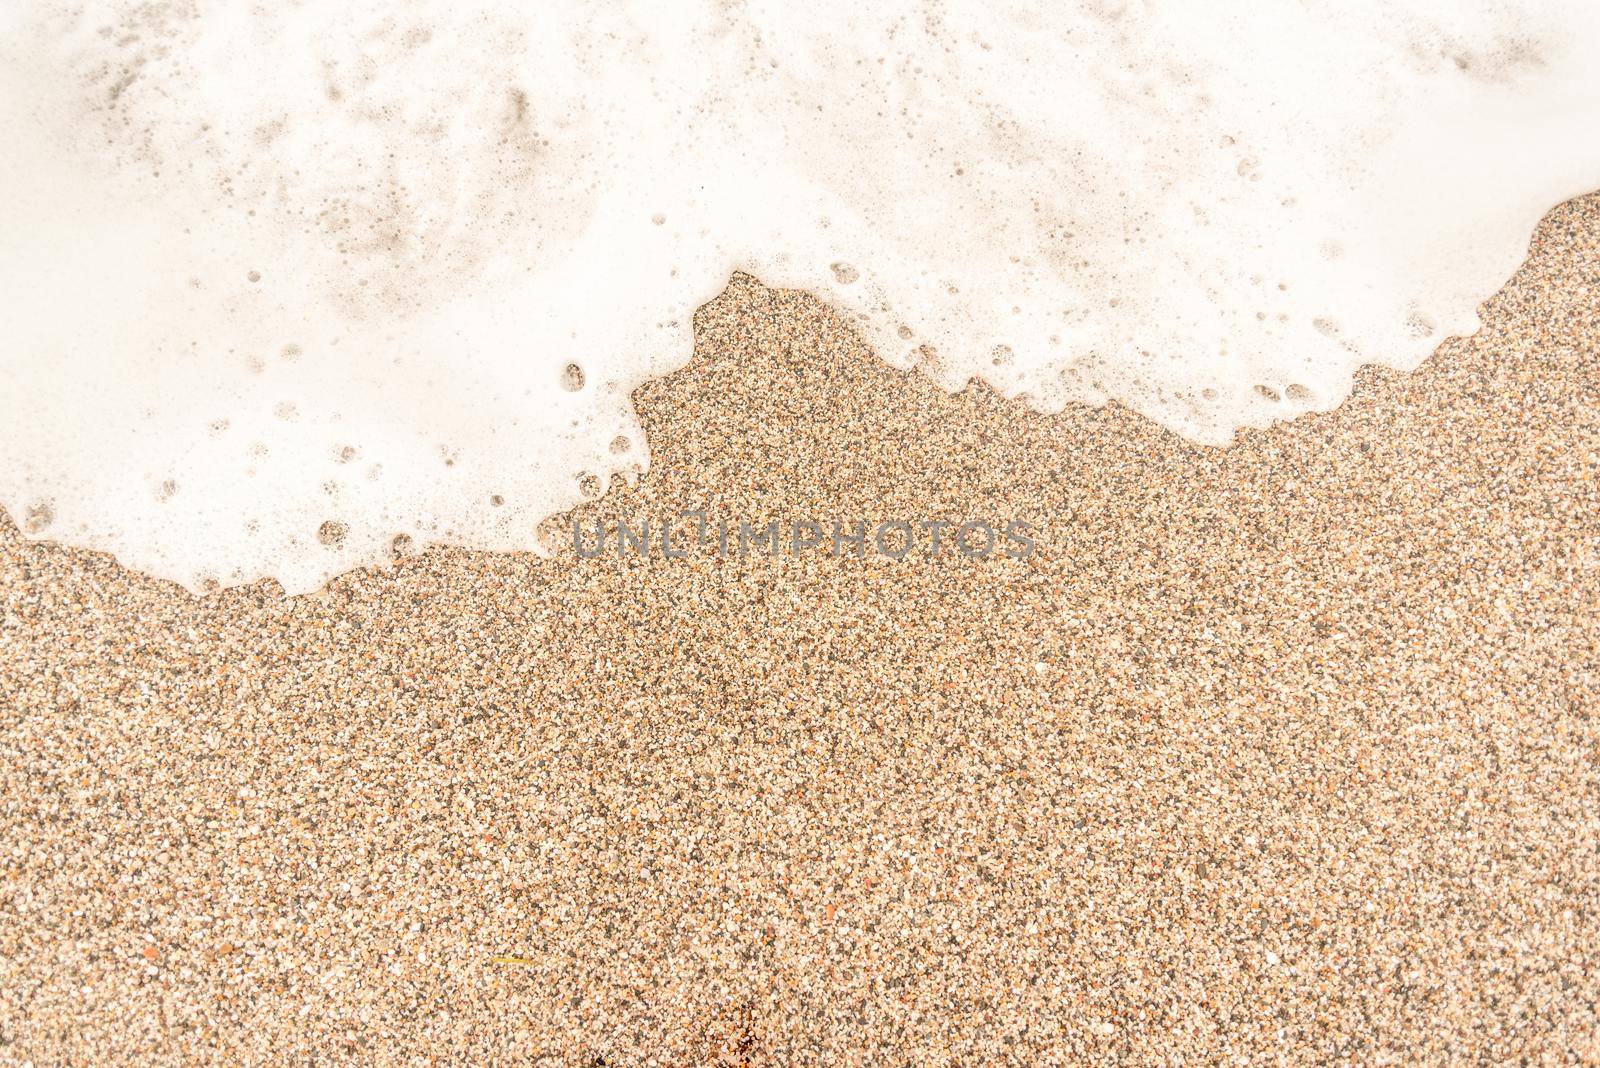 Top view full frame of textured background of brown sand with sea foam on beach